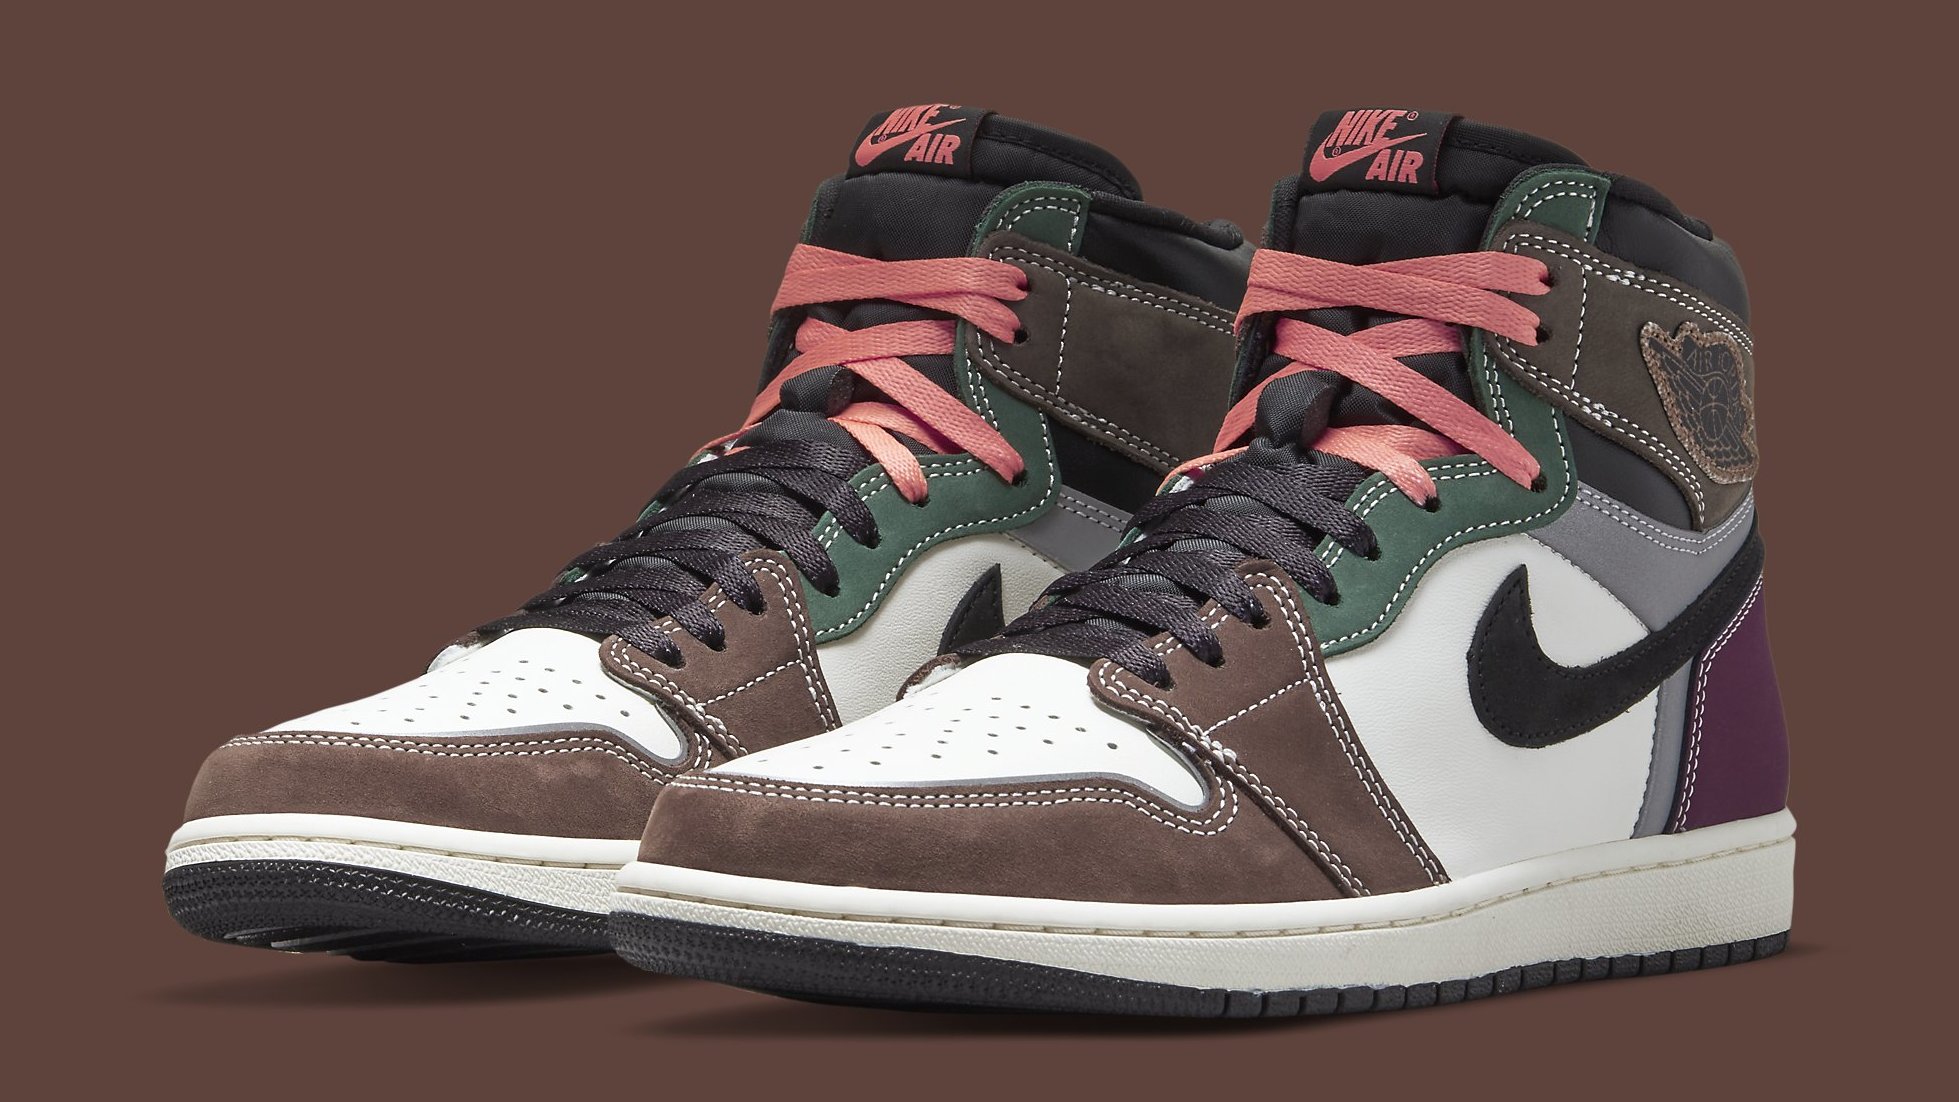 Best Look Yet at the 'Handcrafted' Air Jordan 1 High | Complex